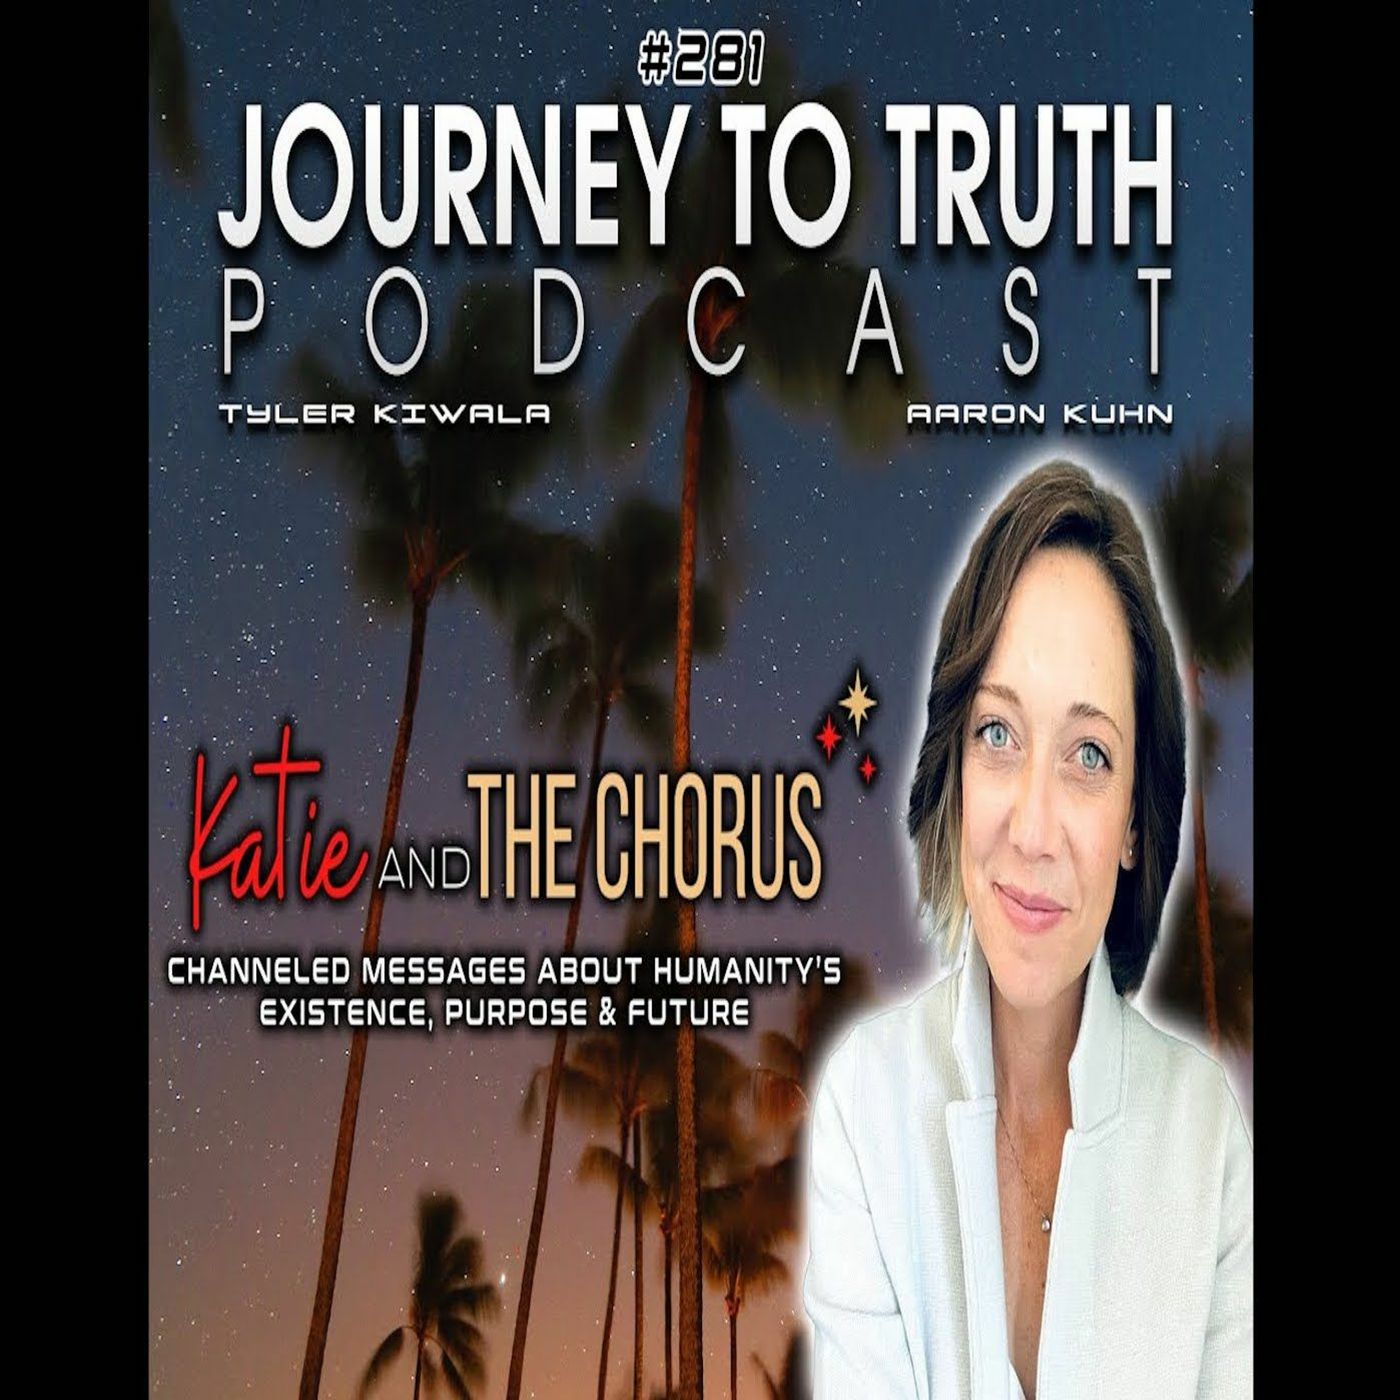 EP 281 - Katie Weiss: Channeled Messages About Humanity's Existence, Purpose & Future